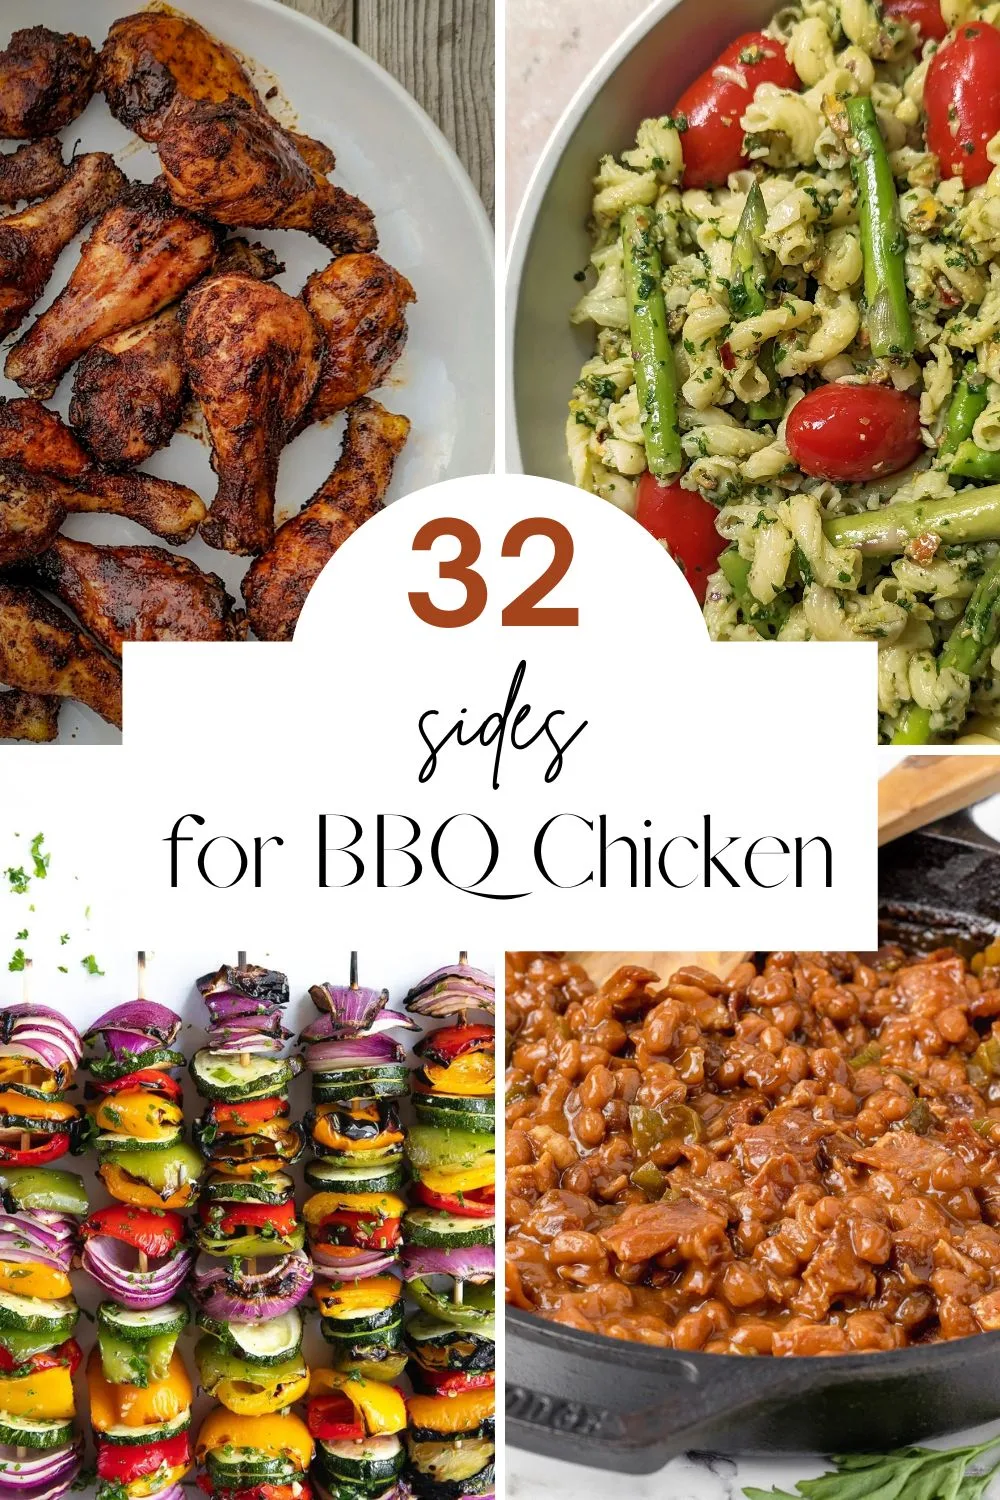 A pinterest pin for What Goes with BBQ Chicken.